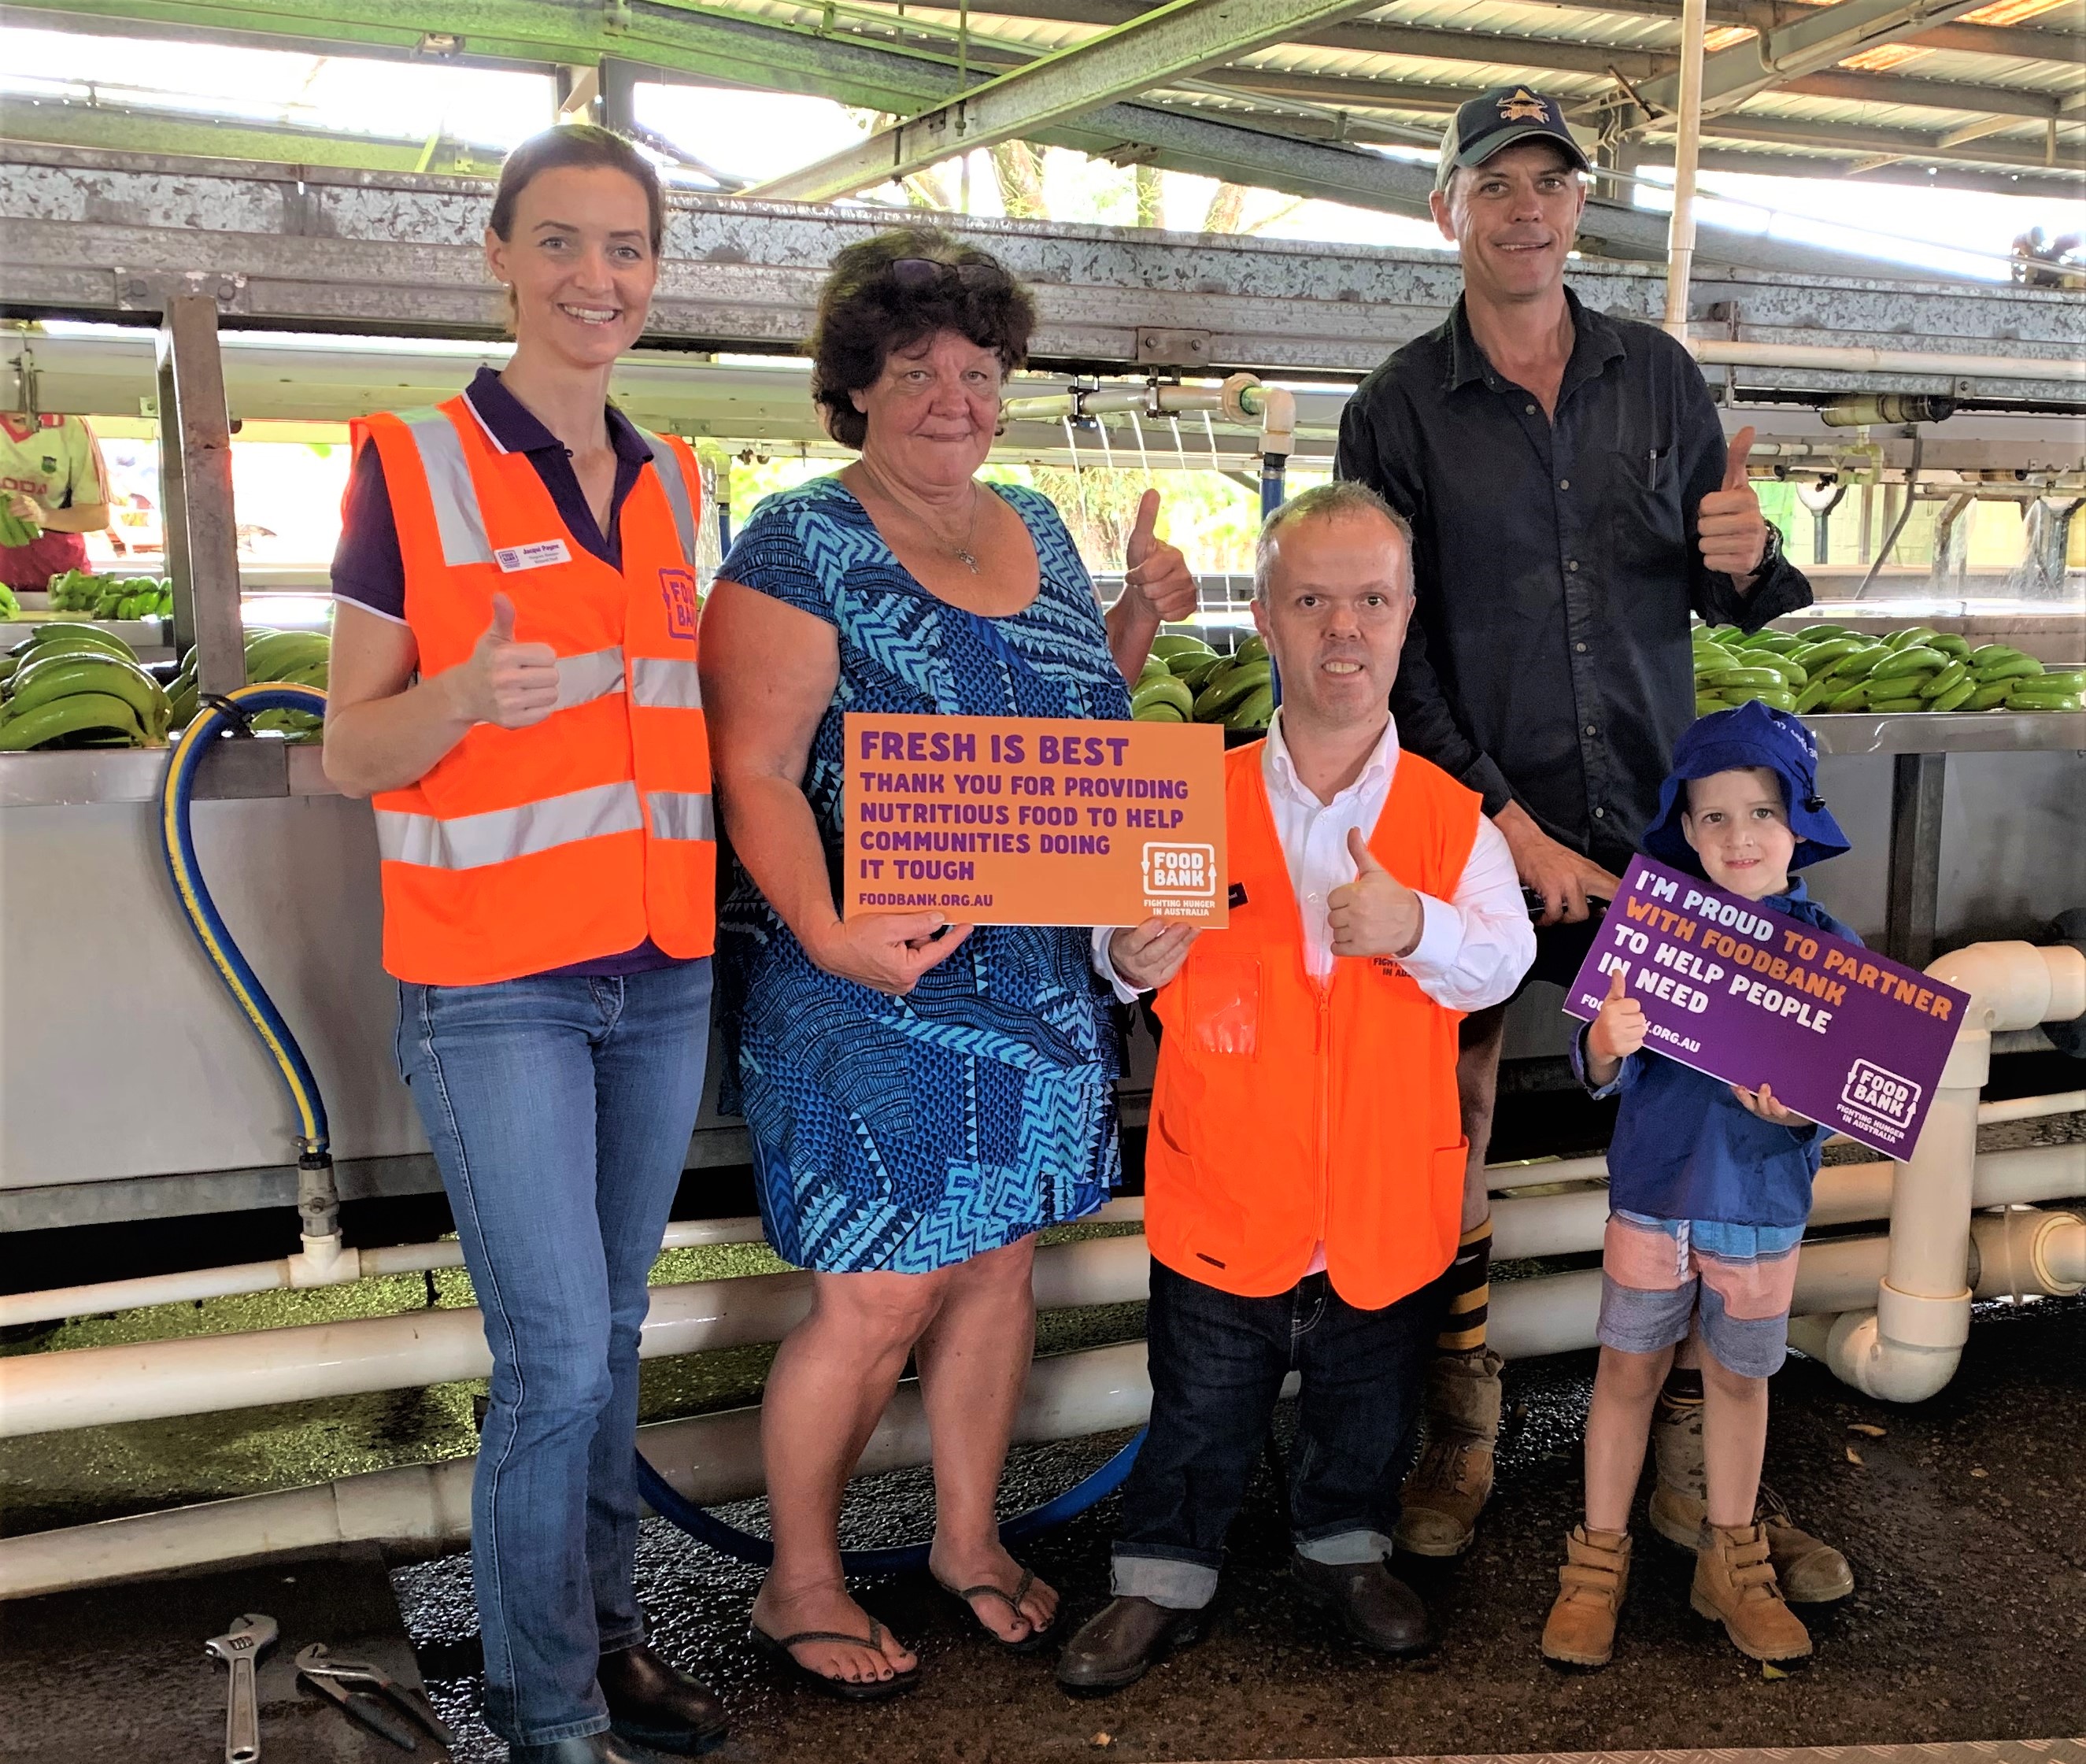 Pictured – Foodbank’s National Program Manager Jacqui Payne (far left) and GM National
Supply Chain Michael Davidson (centre) met with Linda Davies, Paul Johnston and Paul’s son
Billy from Merryport Bananas during a recent visit North.